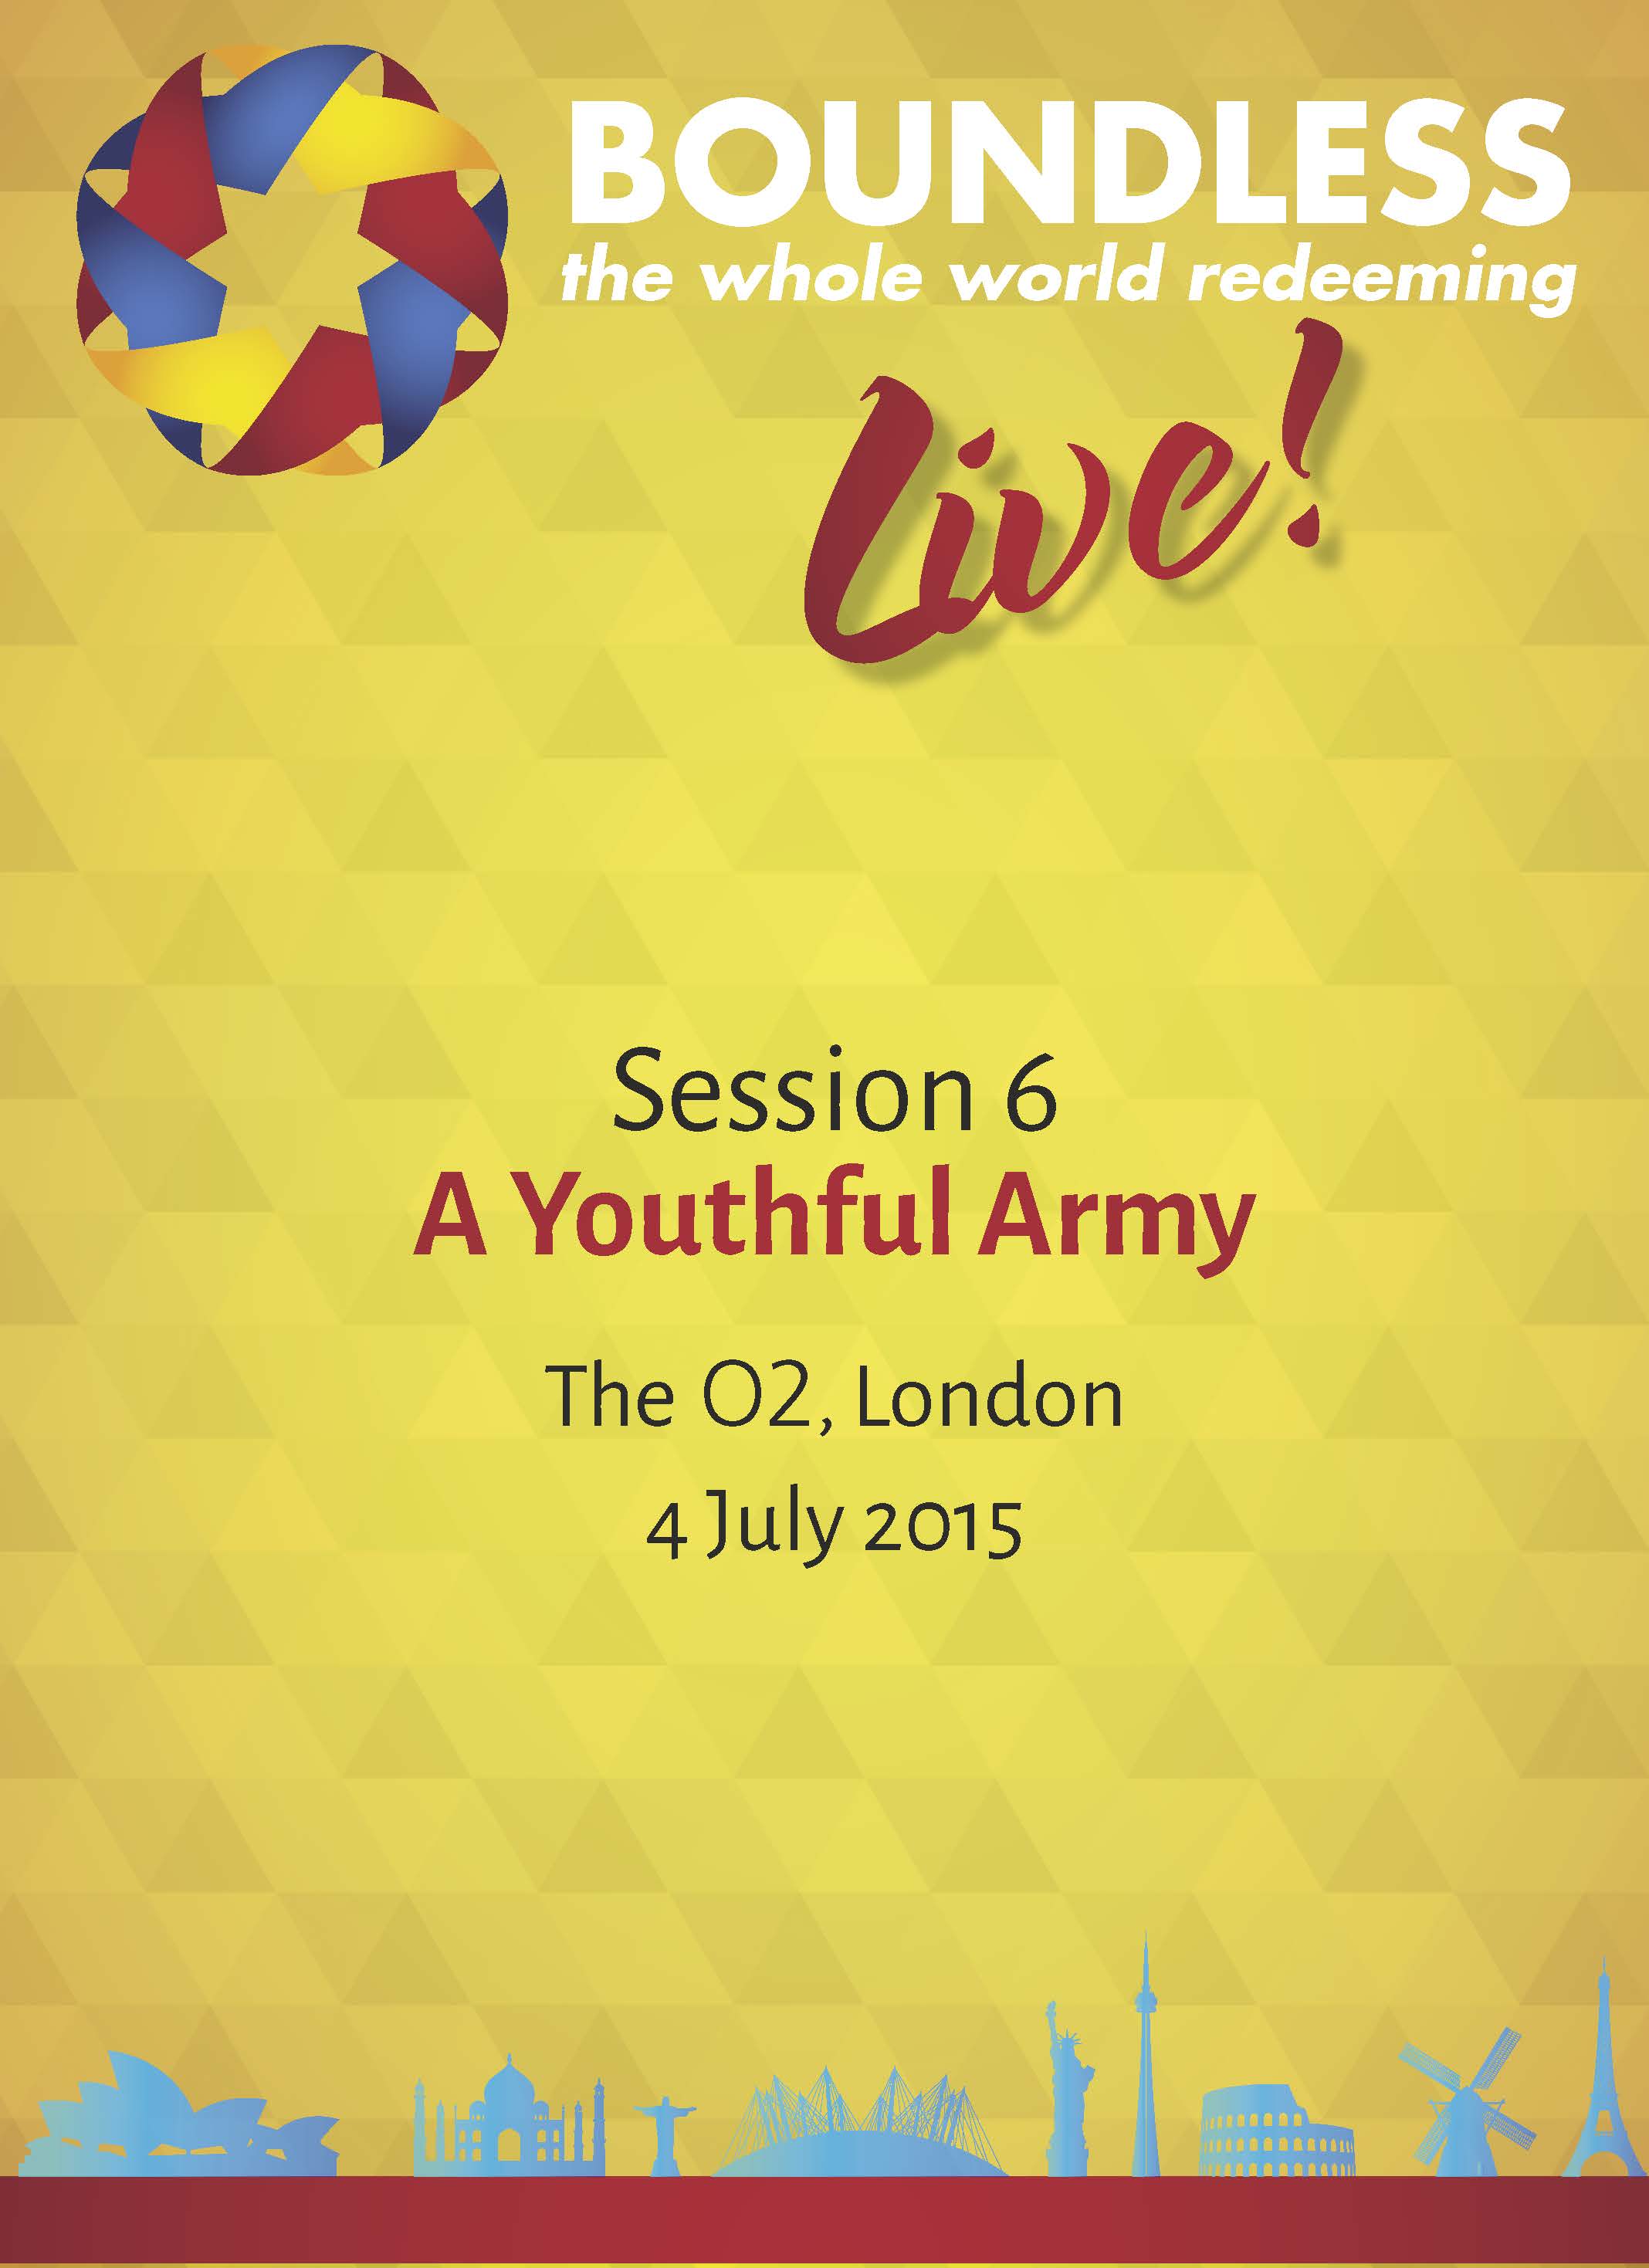 Boundless Live! Session 6 - A Youthful Army